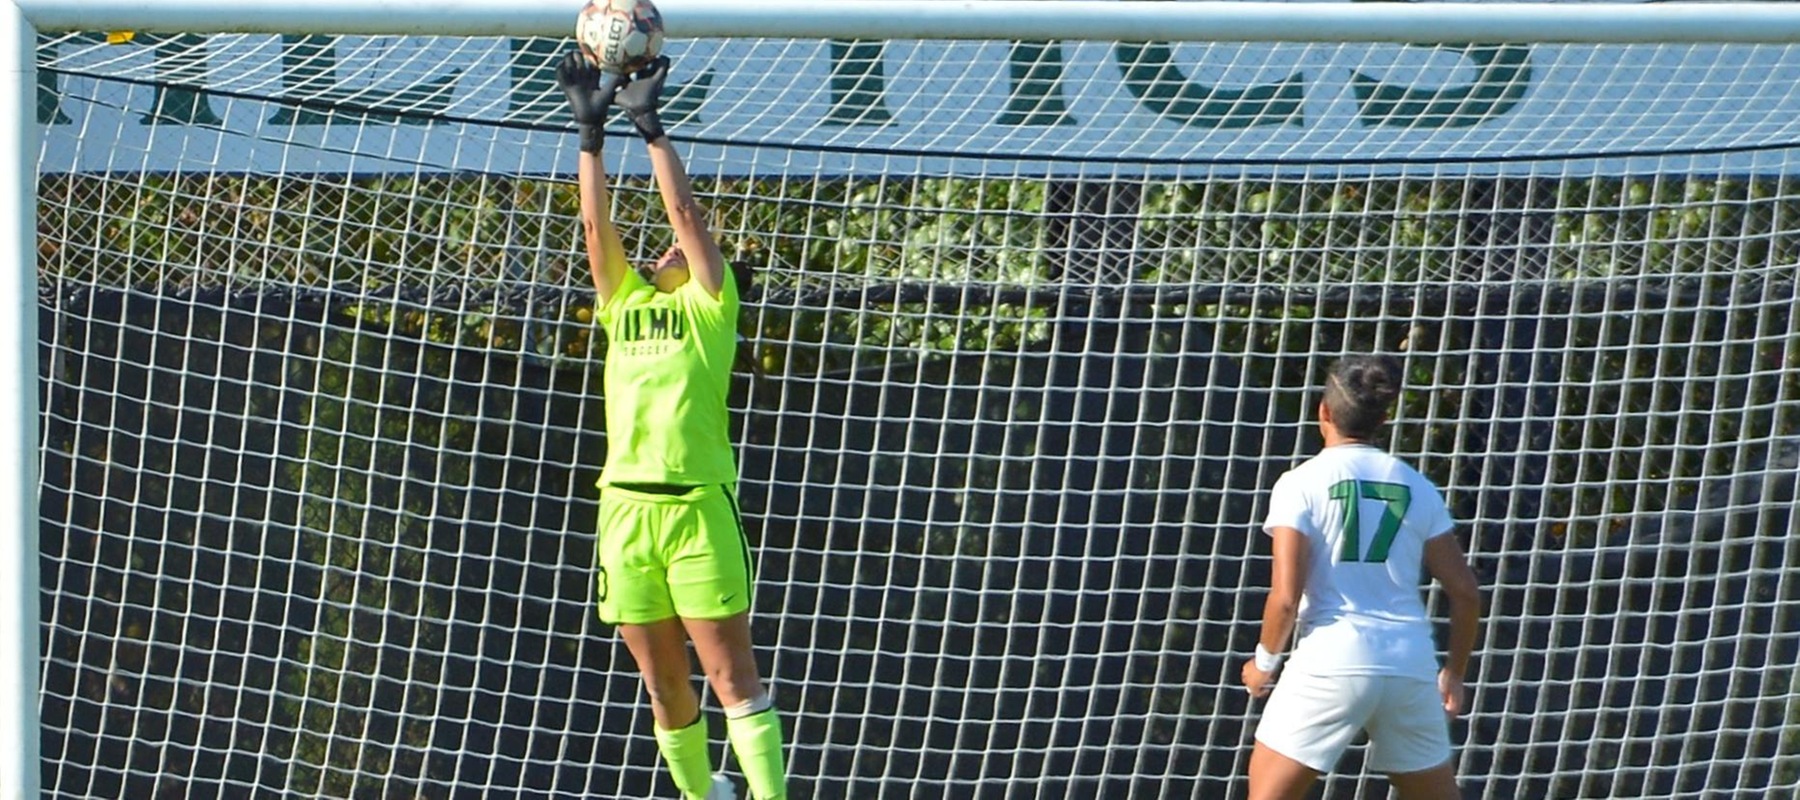 File photo of Emily Camp who made 13 saves at Bentley. Copyright 2019; Wilmington University. All rights reserved. Photo by James Jones. October 15, 2019 vs. Jefferson.